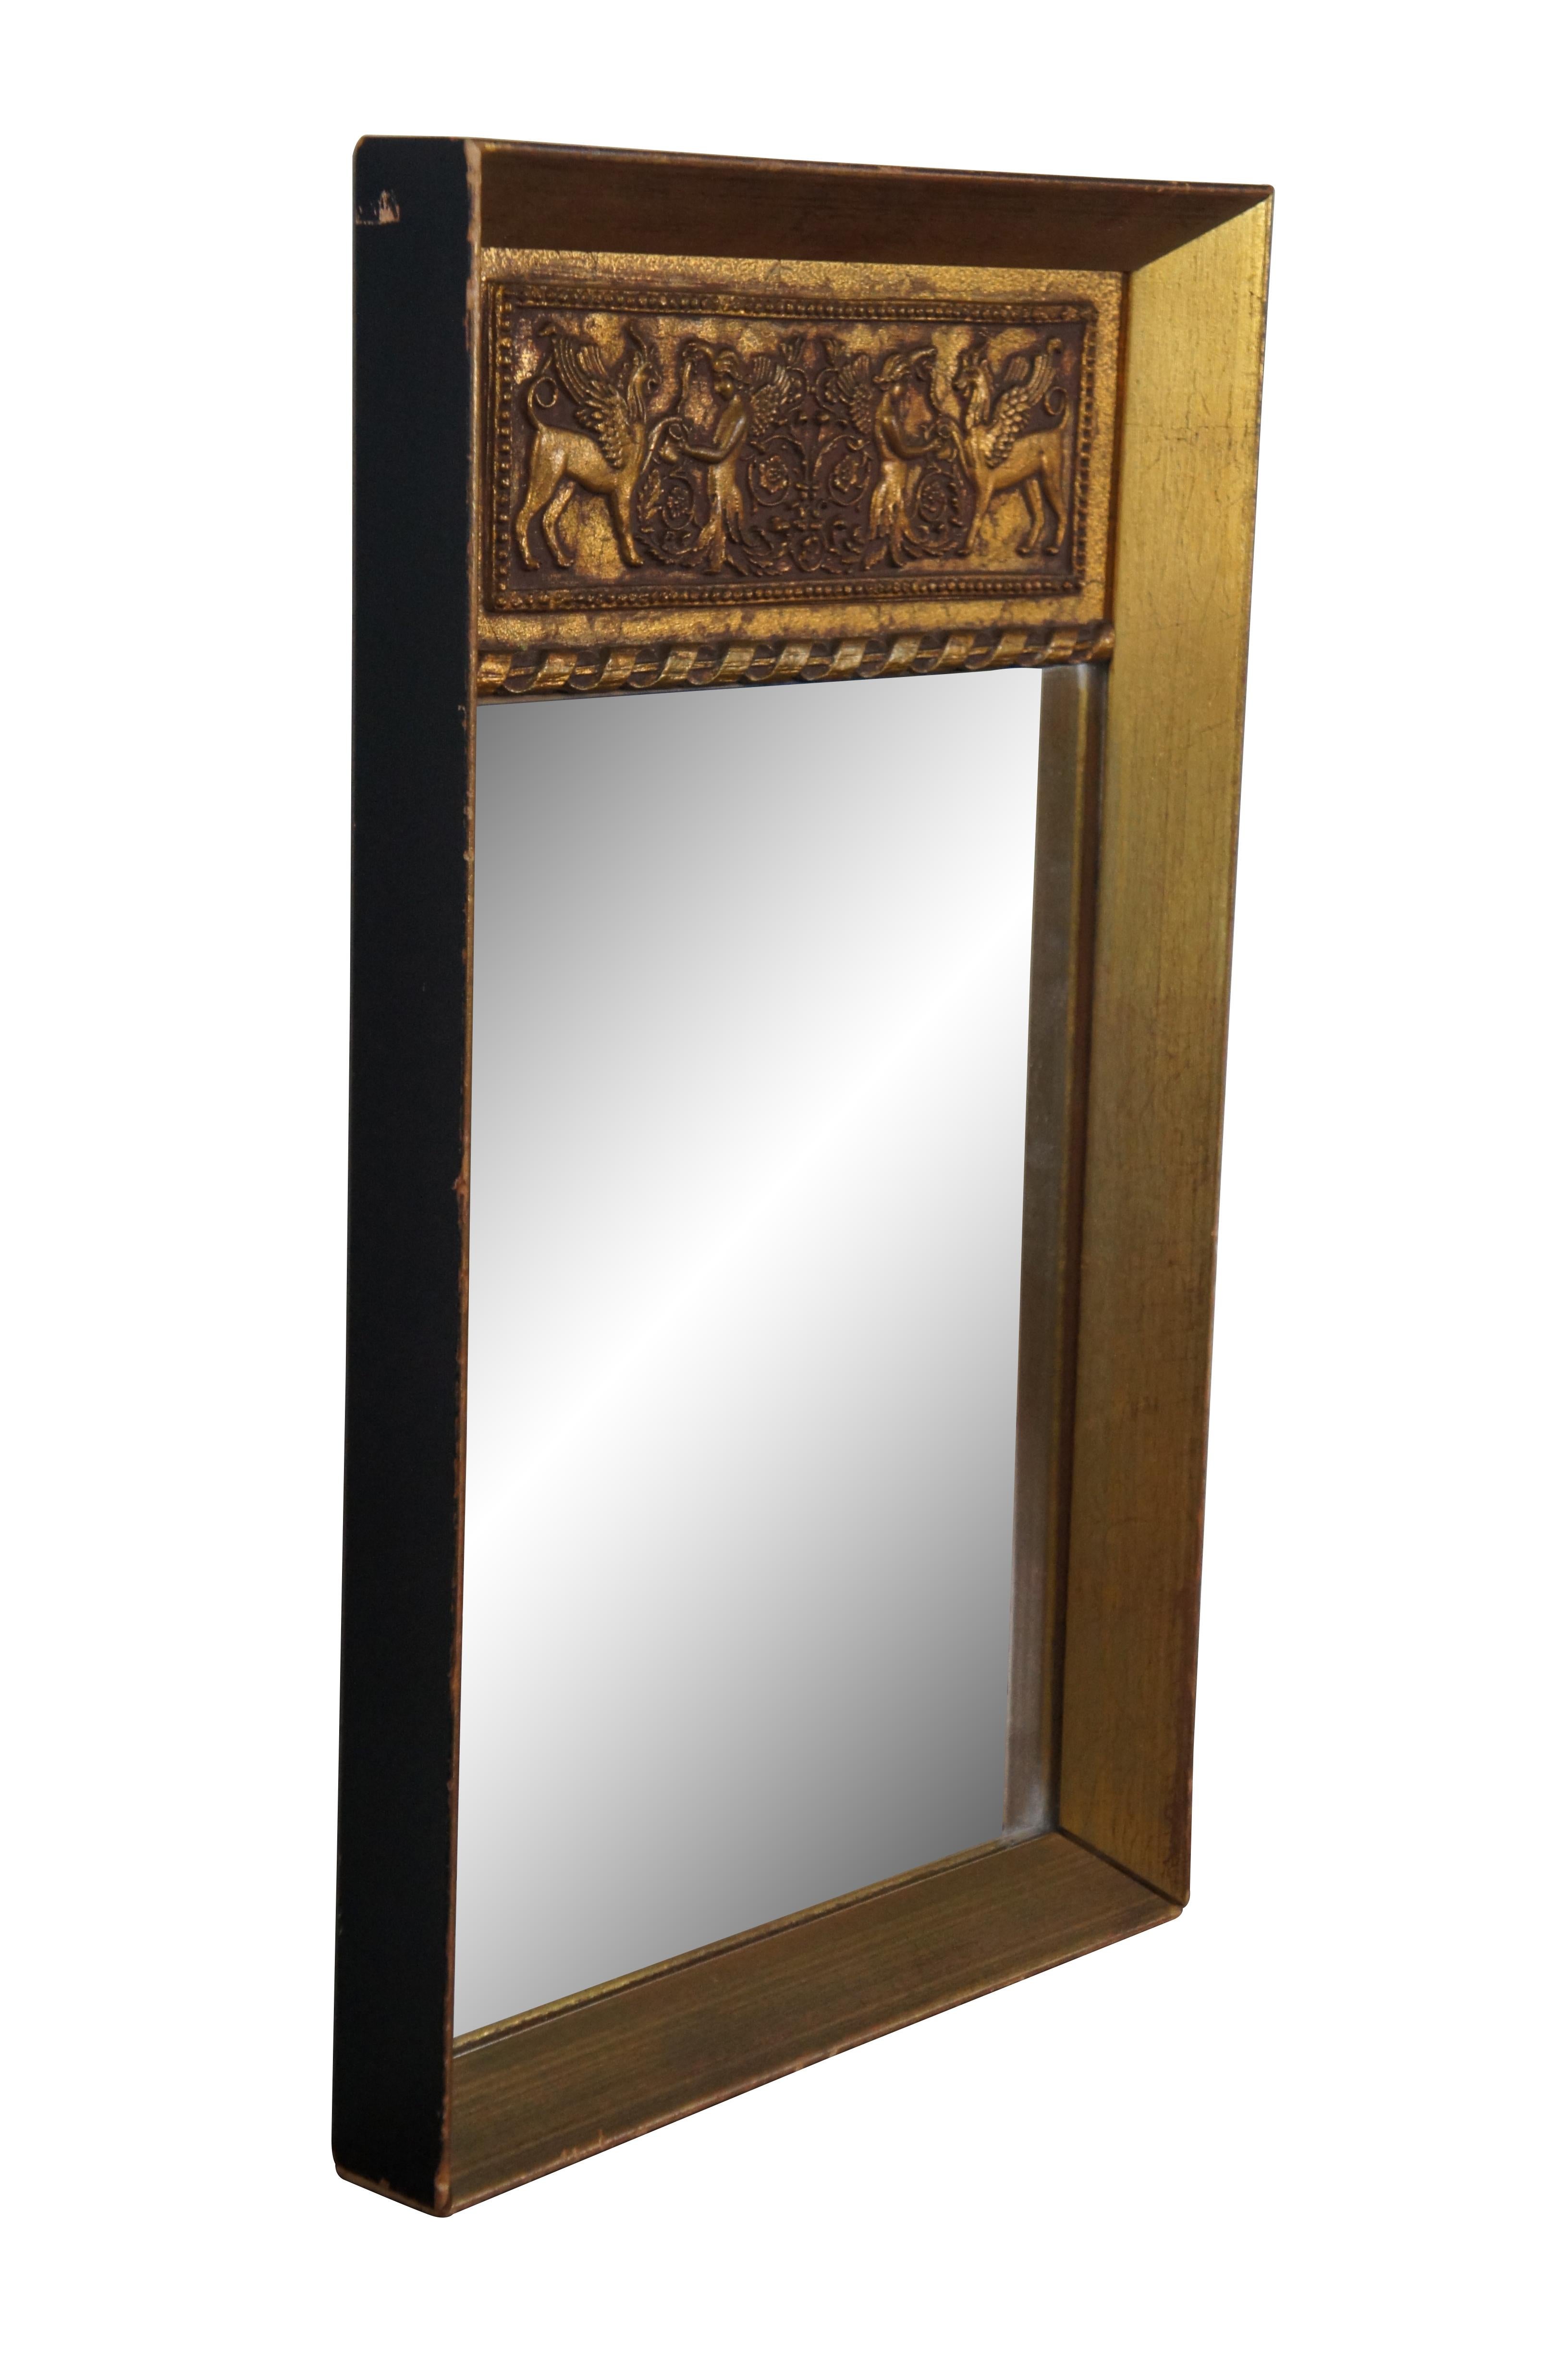 Vintage gilt wood trumeau style wall mirror featuring a rectangular beveled frame topped with a spiraling ribbon dividing the mirror from a neoclassical relief showing a winged angel figure pouring wine or water into a jug for a chimera-like